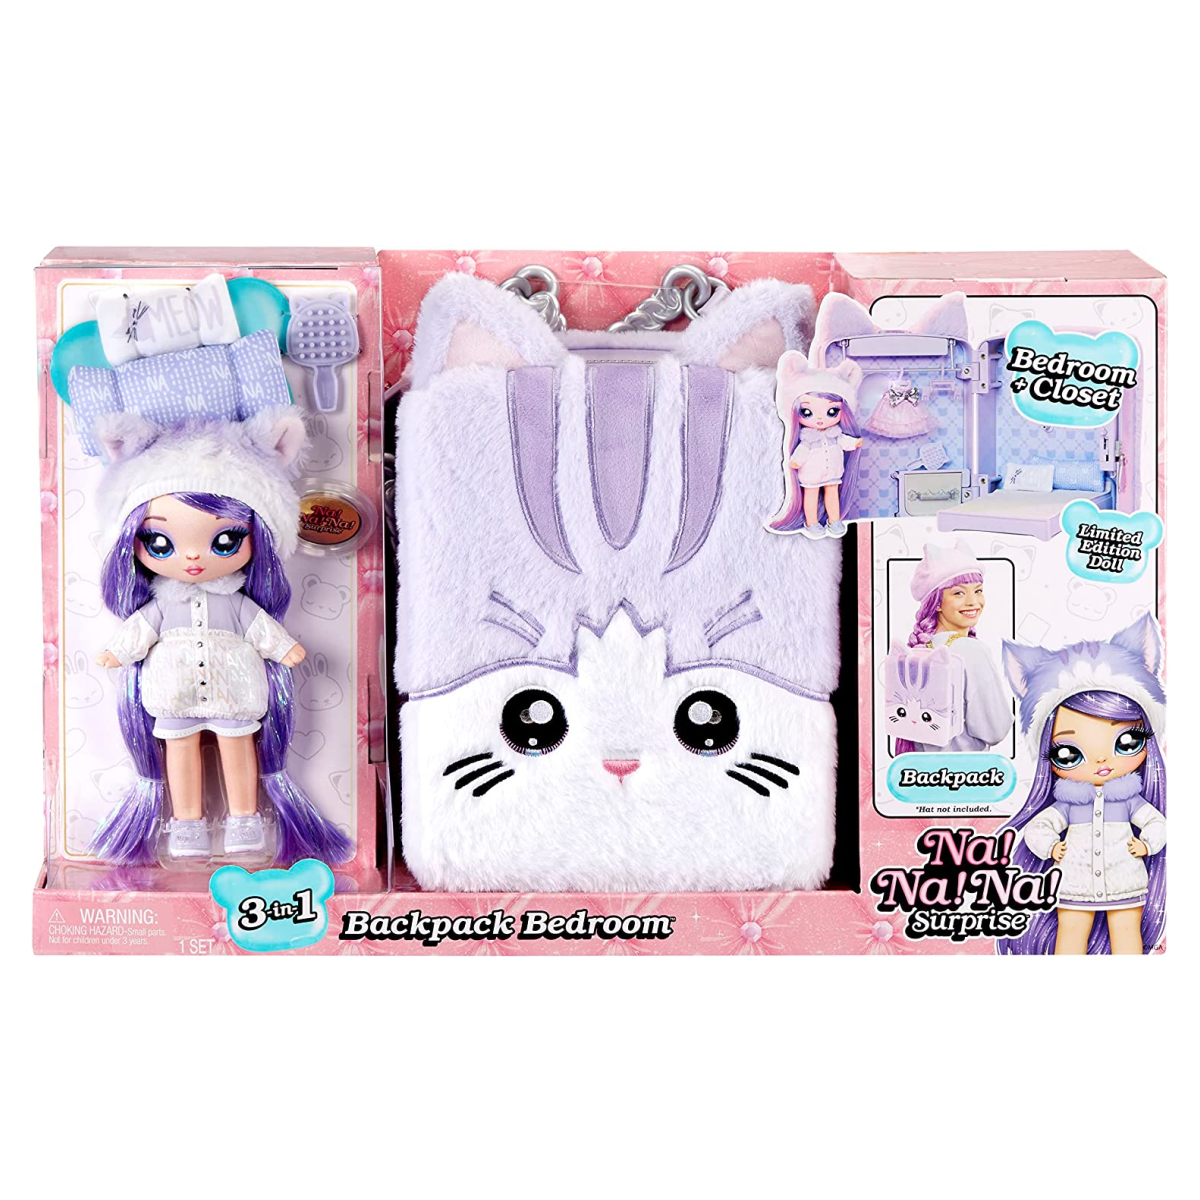 https://extremecouponingmom.ca/wp-content/uploads/2022/11/Na-Na-Na-Surprise-3-in-1-Backpack-Bedroom-Playset-Series-3-Lavender-Kitty.png